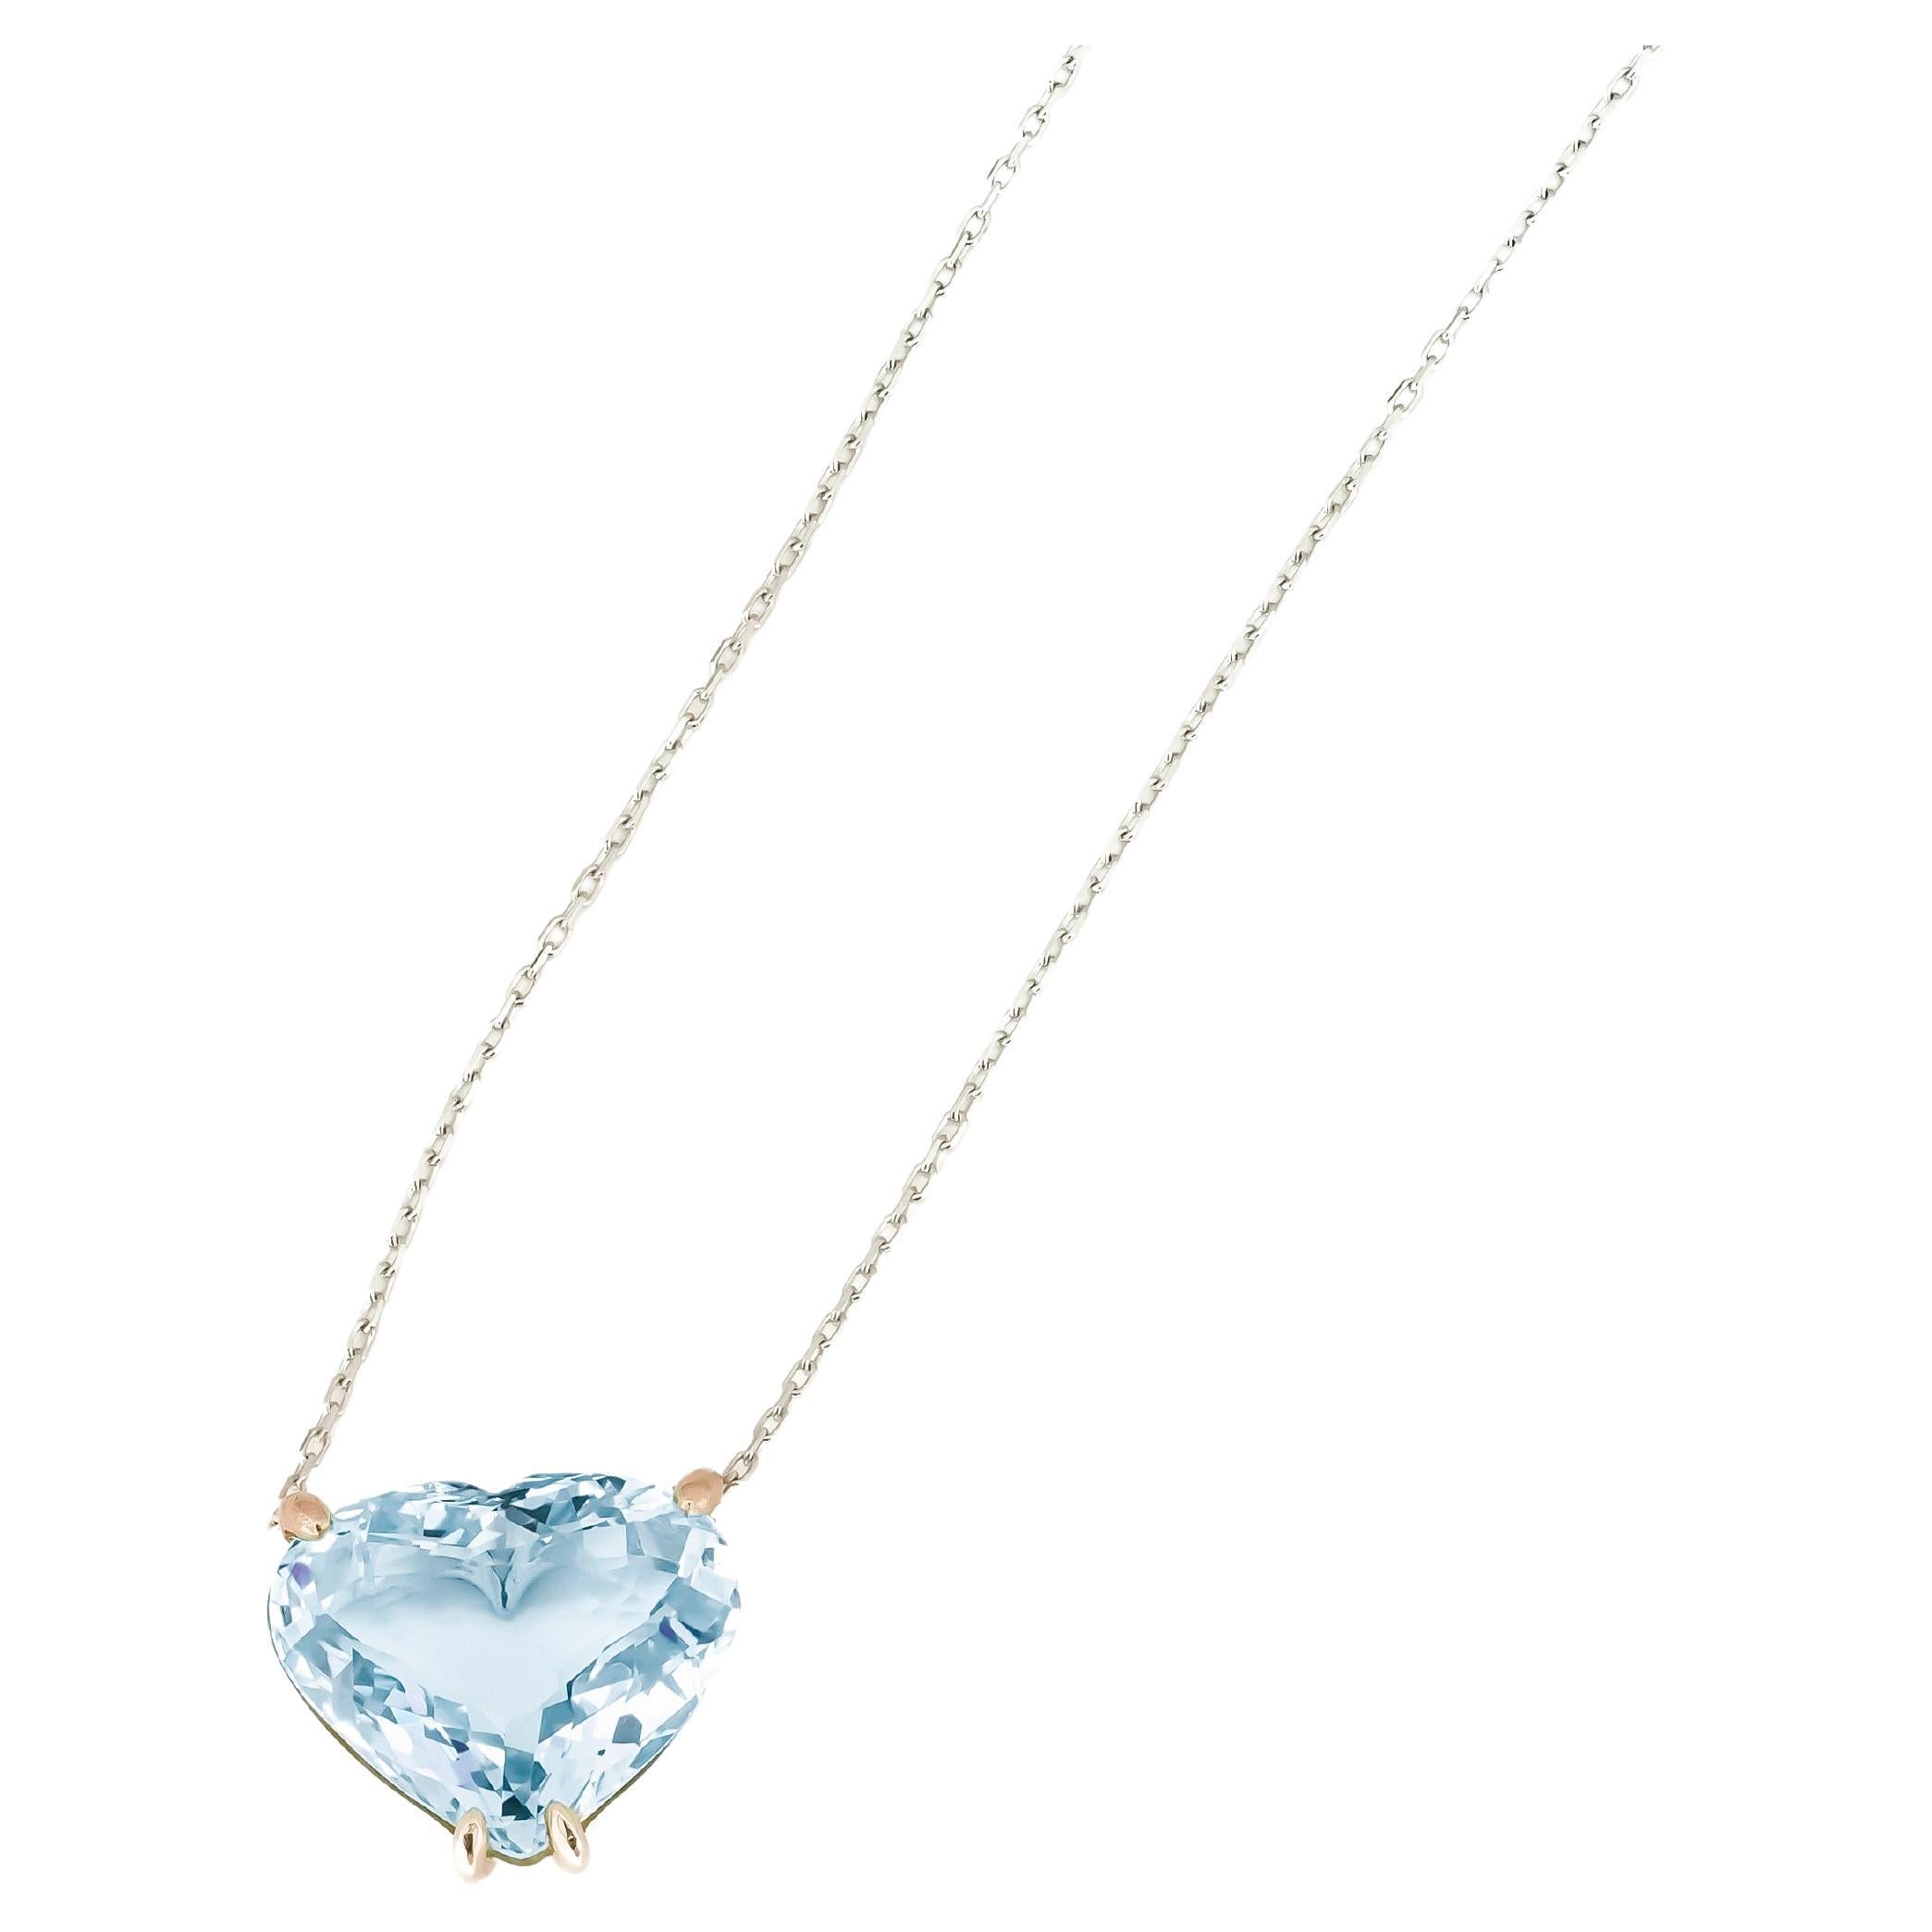 Heart shaped topaz pendant necklace in 14k gold. 